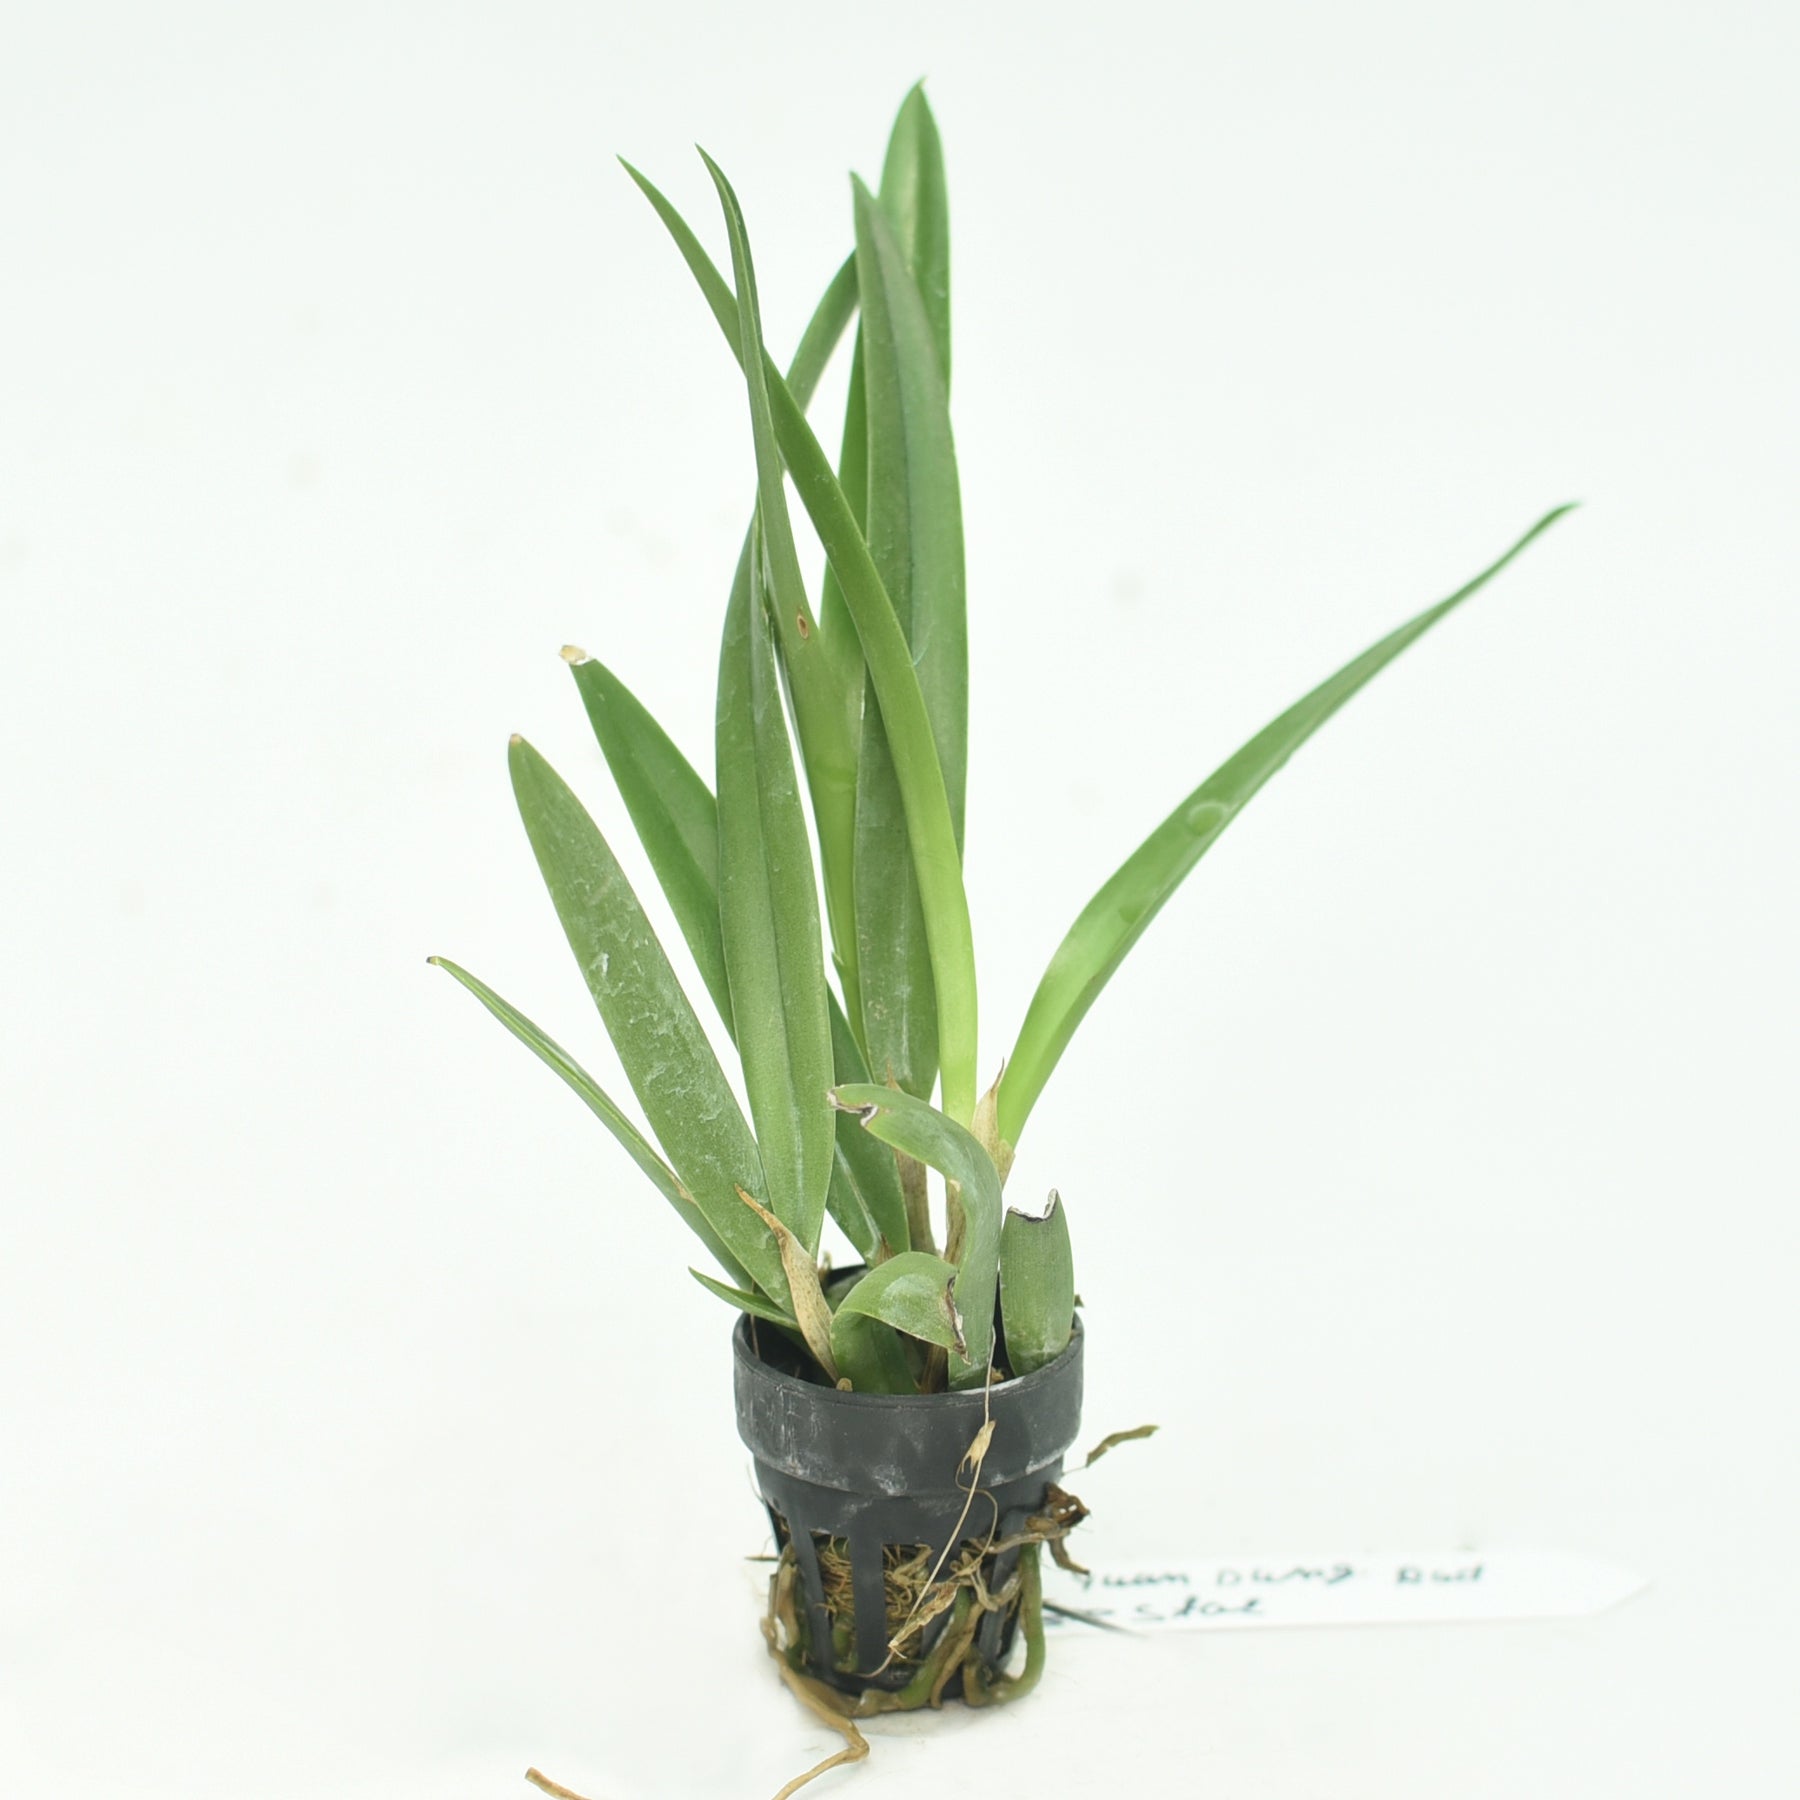  Its bold, eye-catching appearance makes it a favorite among orchid enthusiasts and interior decorators alike.